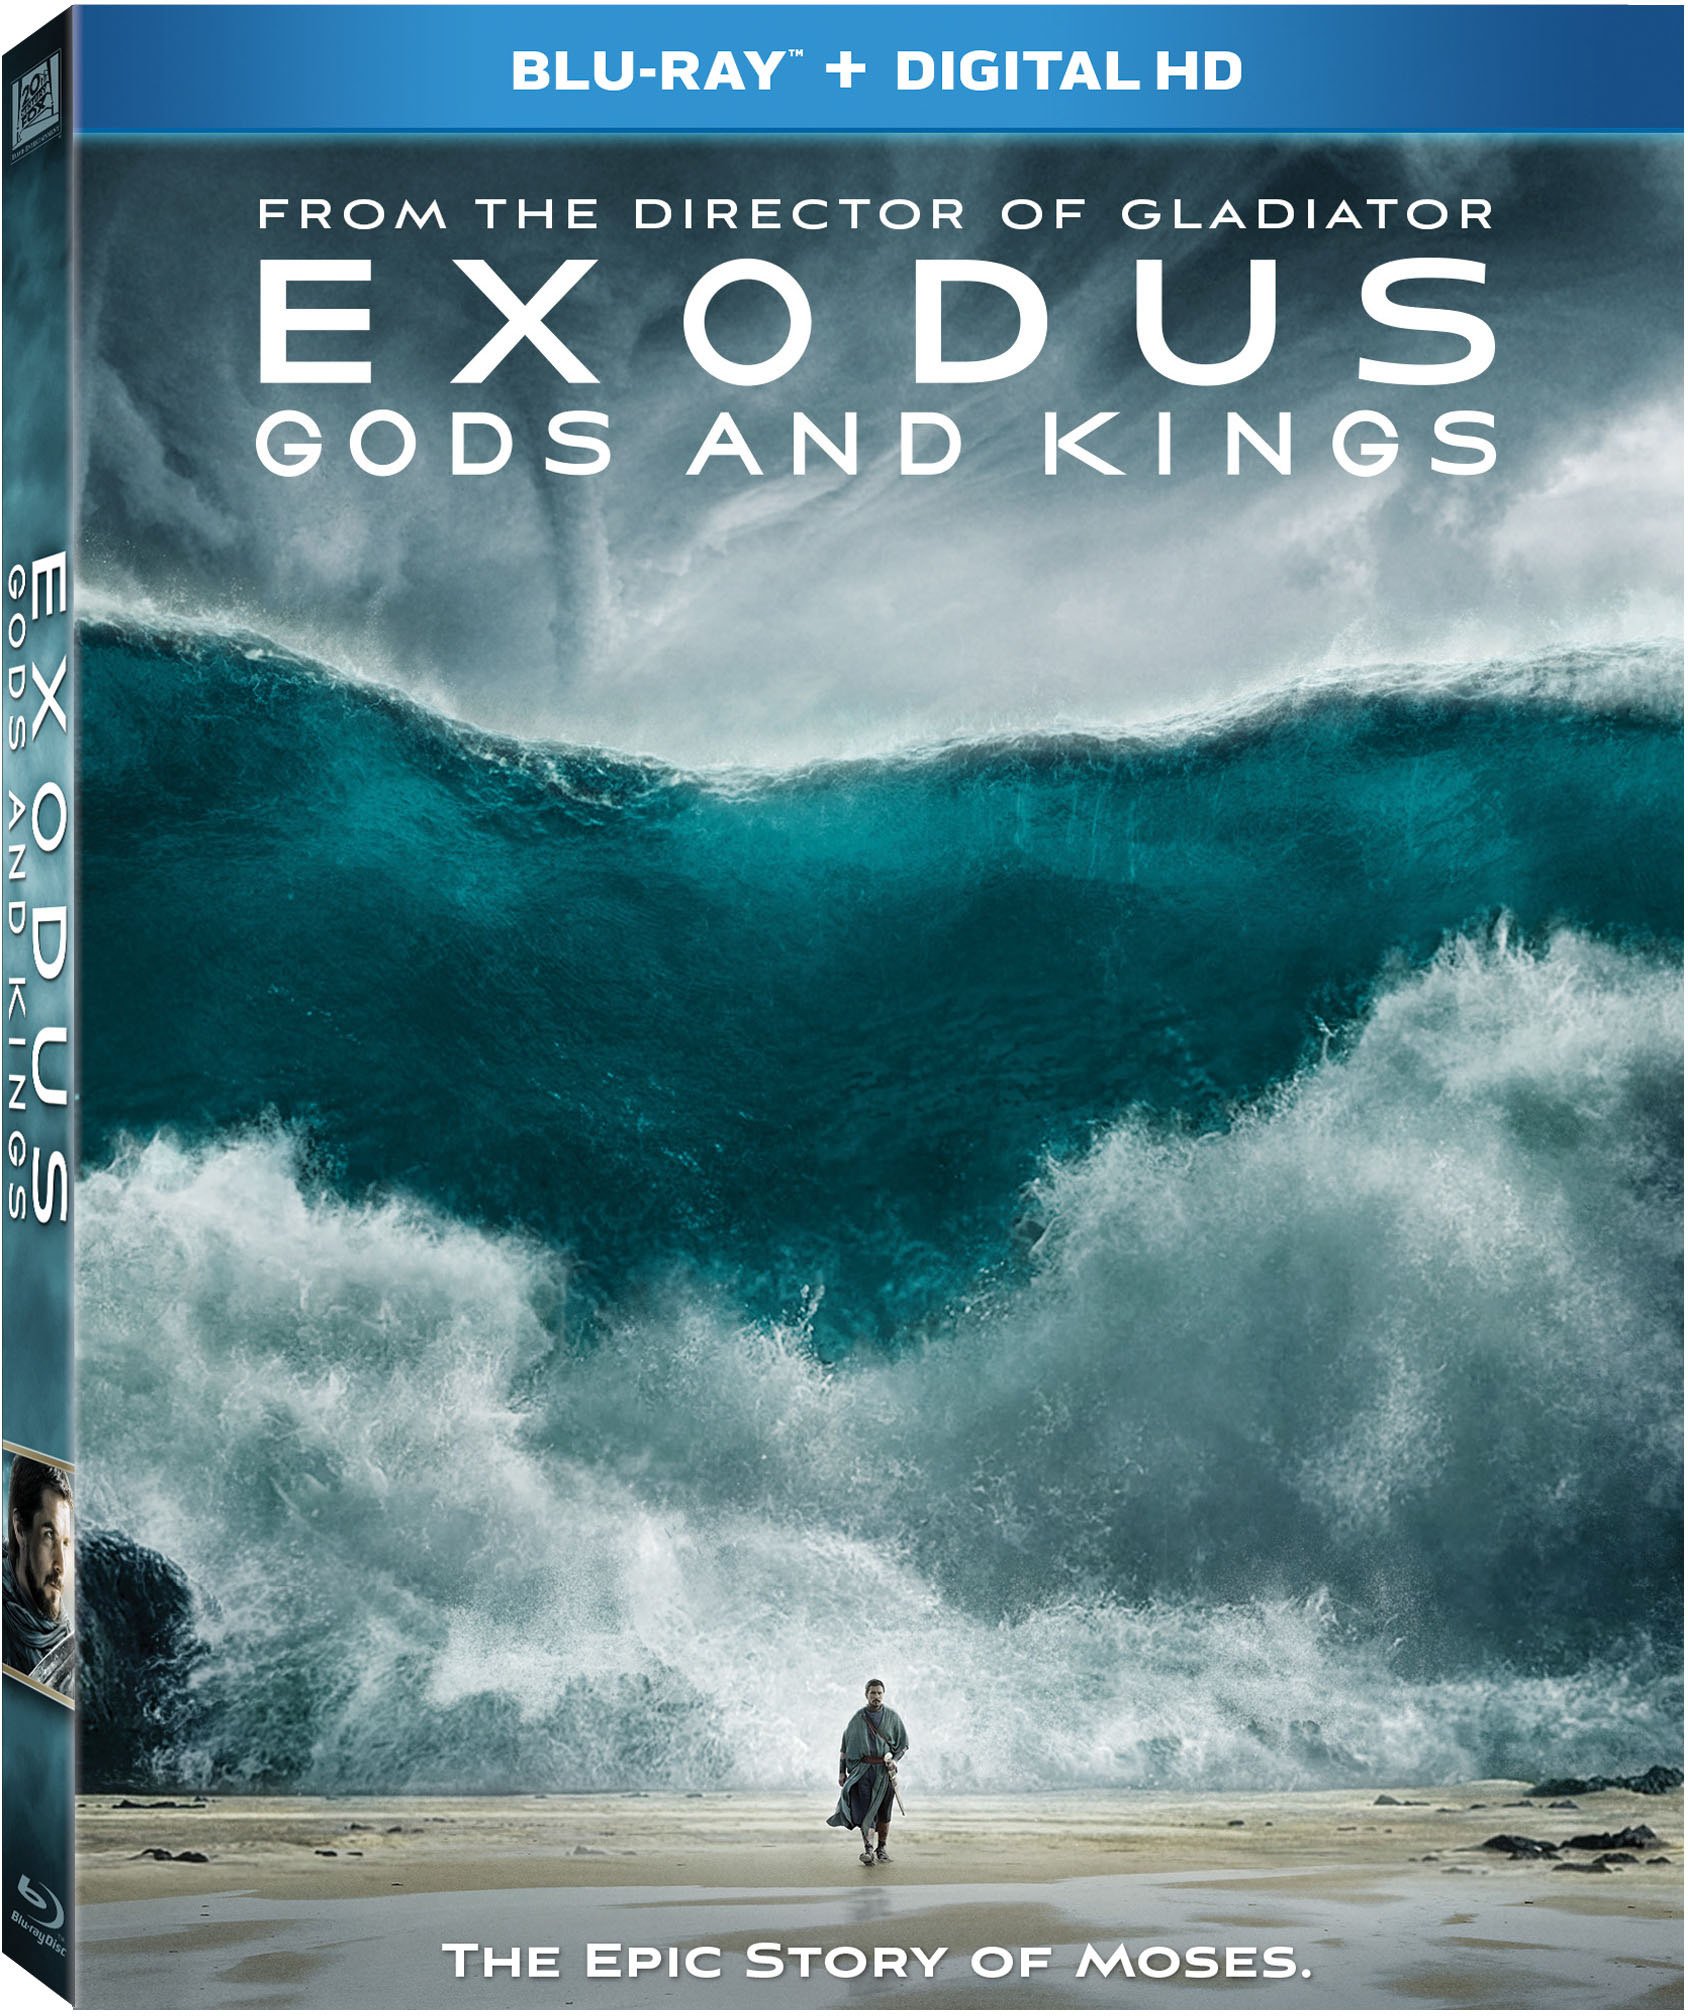 Exodus: Gods and Kings DVD Release Date March 17, 2015